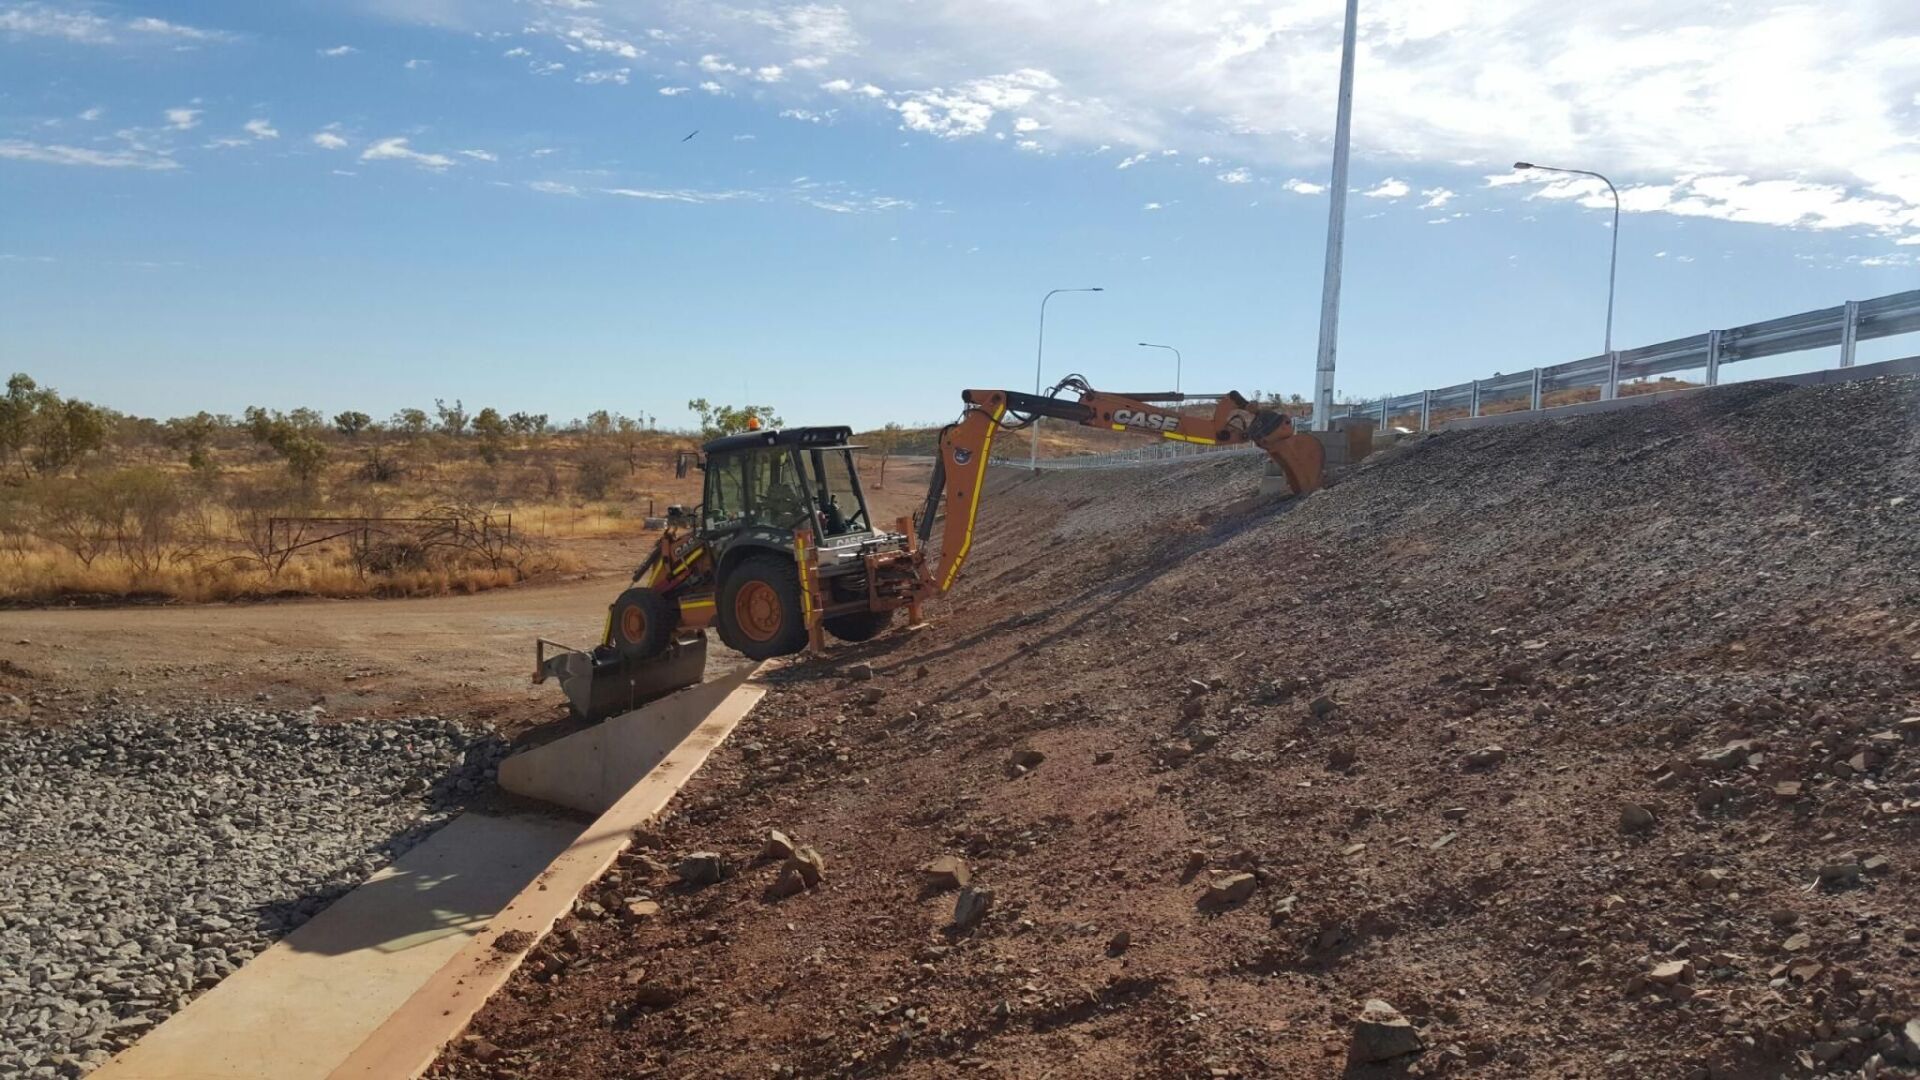 Excavation Equipment for Hire — Civil Works in Mt. Isa, QLD